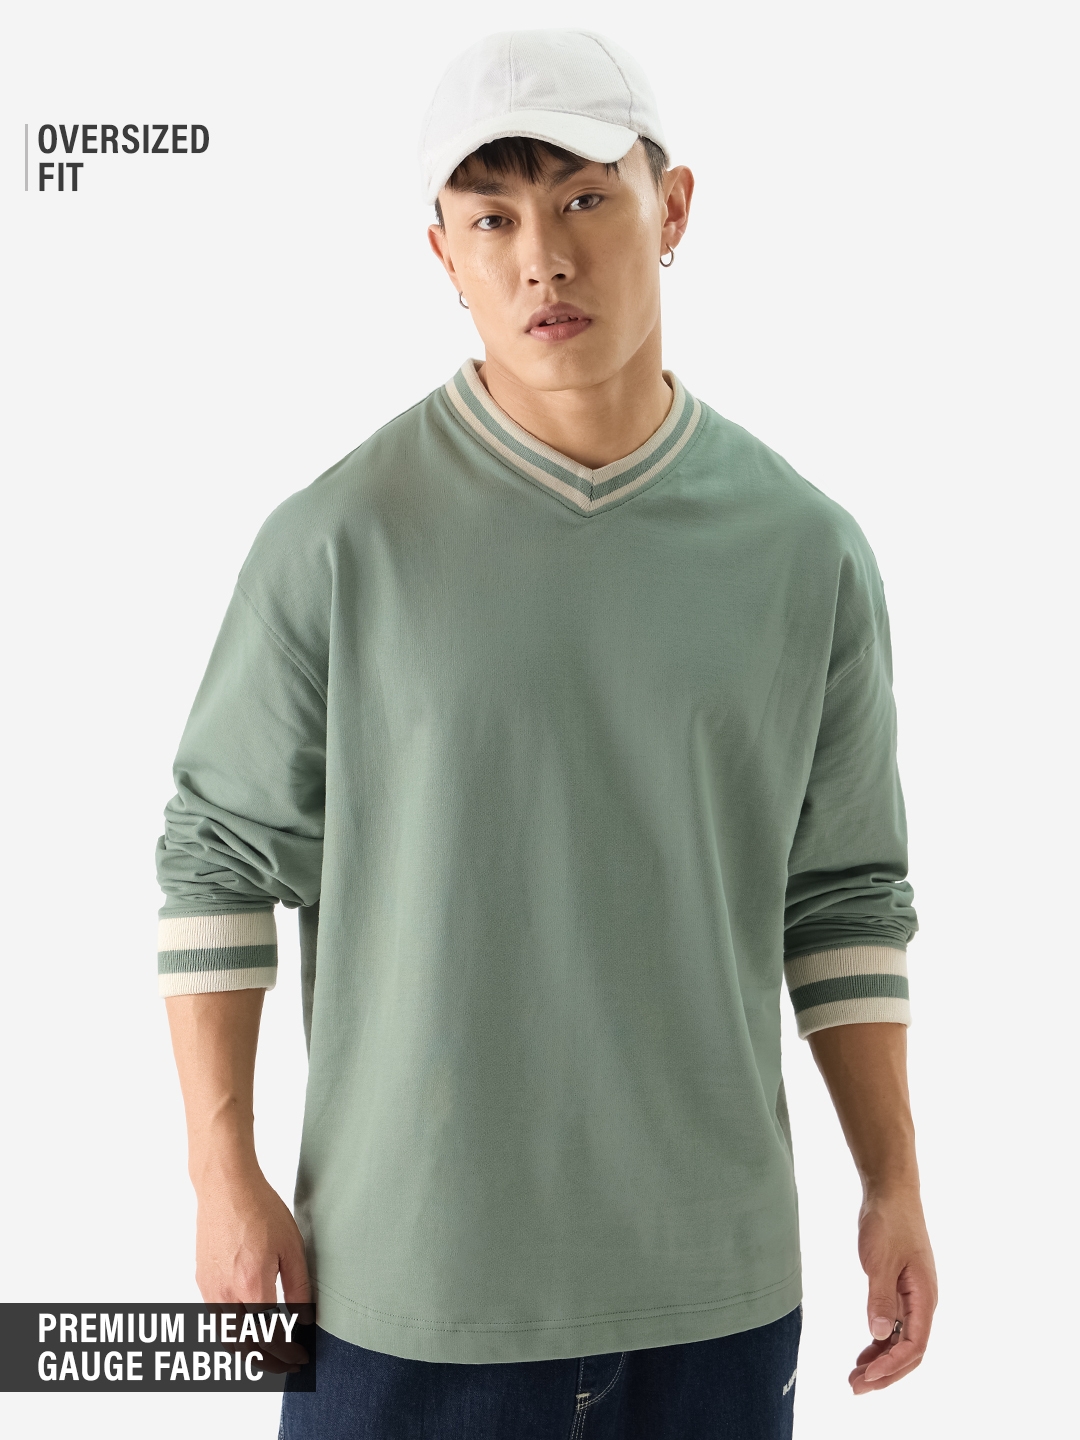 The Souled Store | Men's Solids: Sage Green Oversized Full Sleeve T-Shirt